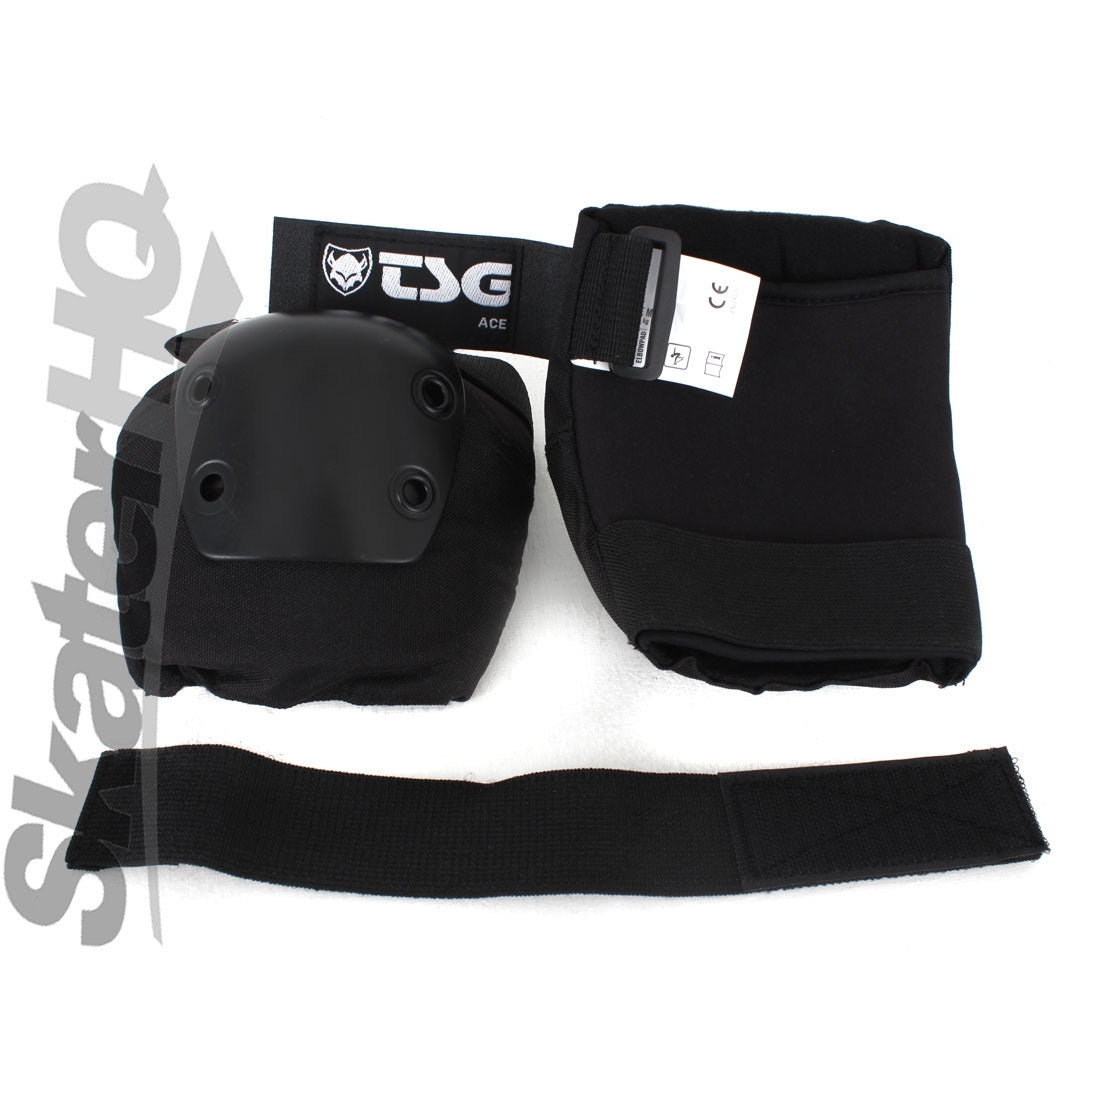 TSG Elbow Ace Pads - Large Protective Gear